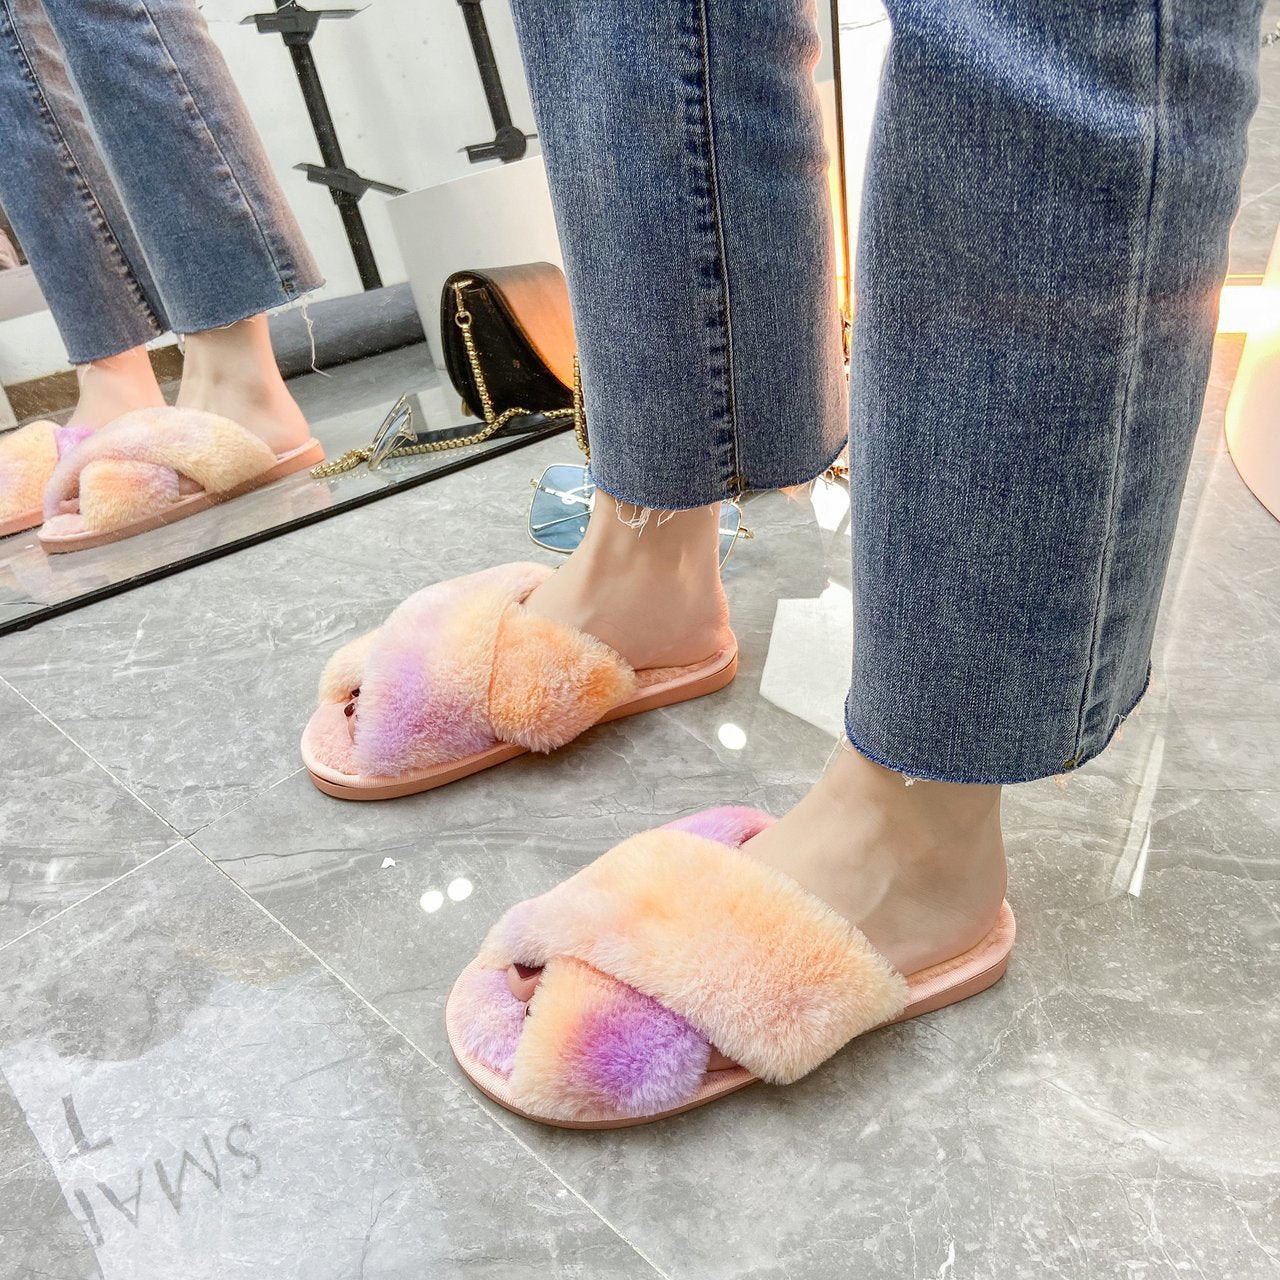 Autumn/Winter New Style Colorful Plush Slippers Cross Strap Soft Plush Flat-Bottomed Large Size Home Cotton Slippers Women's Shoes